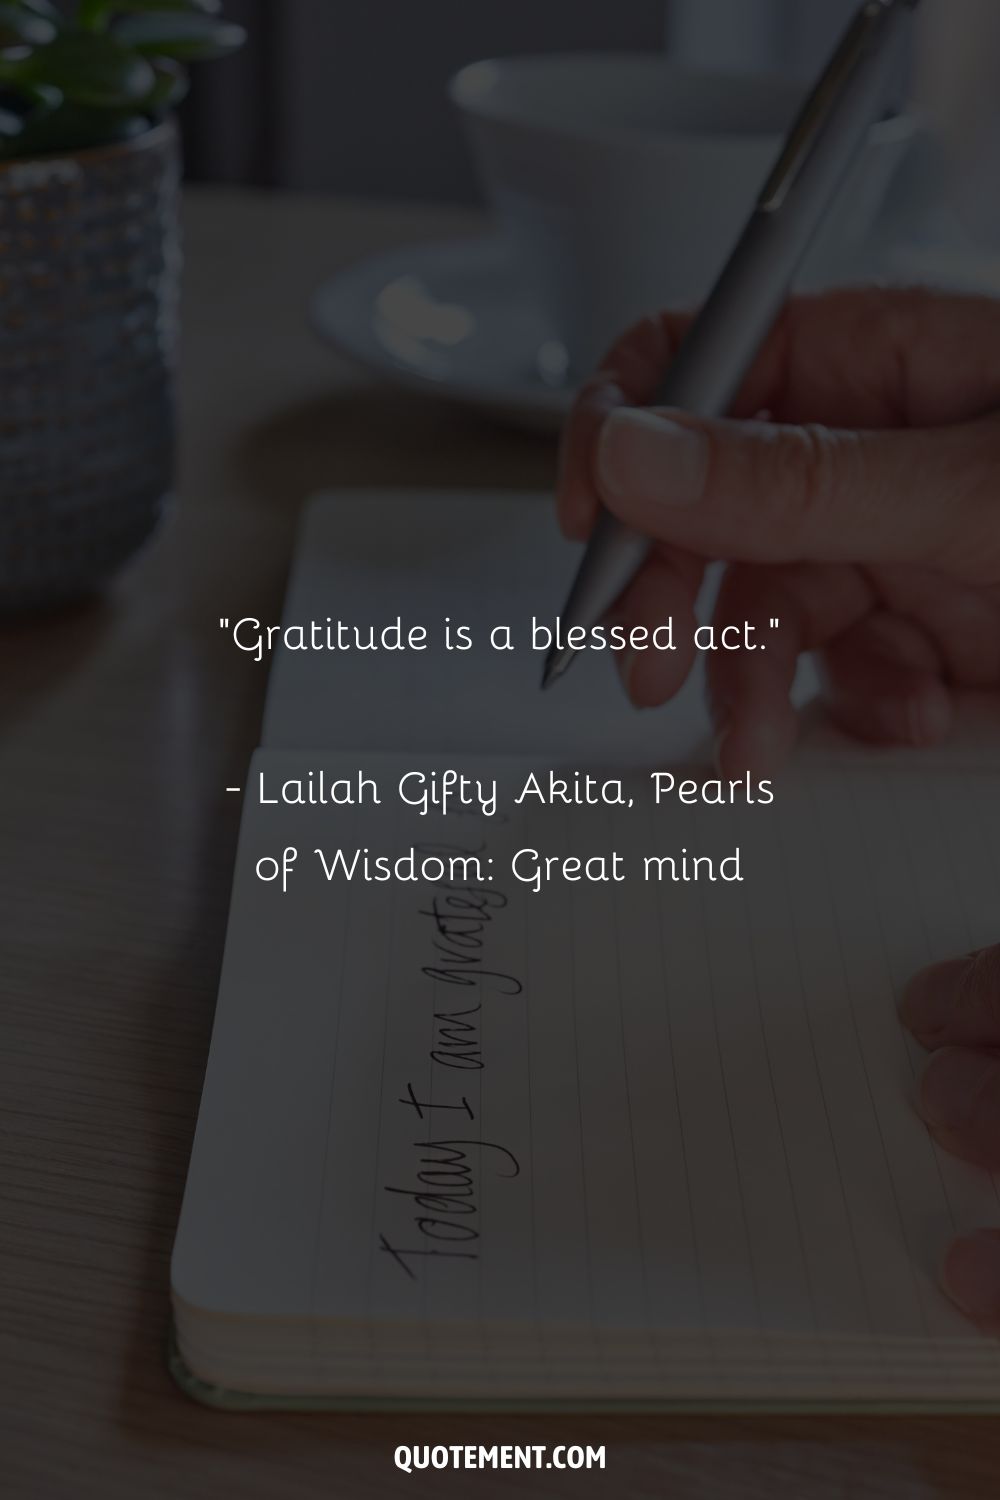 Gratitude is a blessed act.